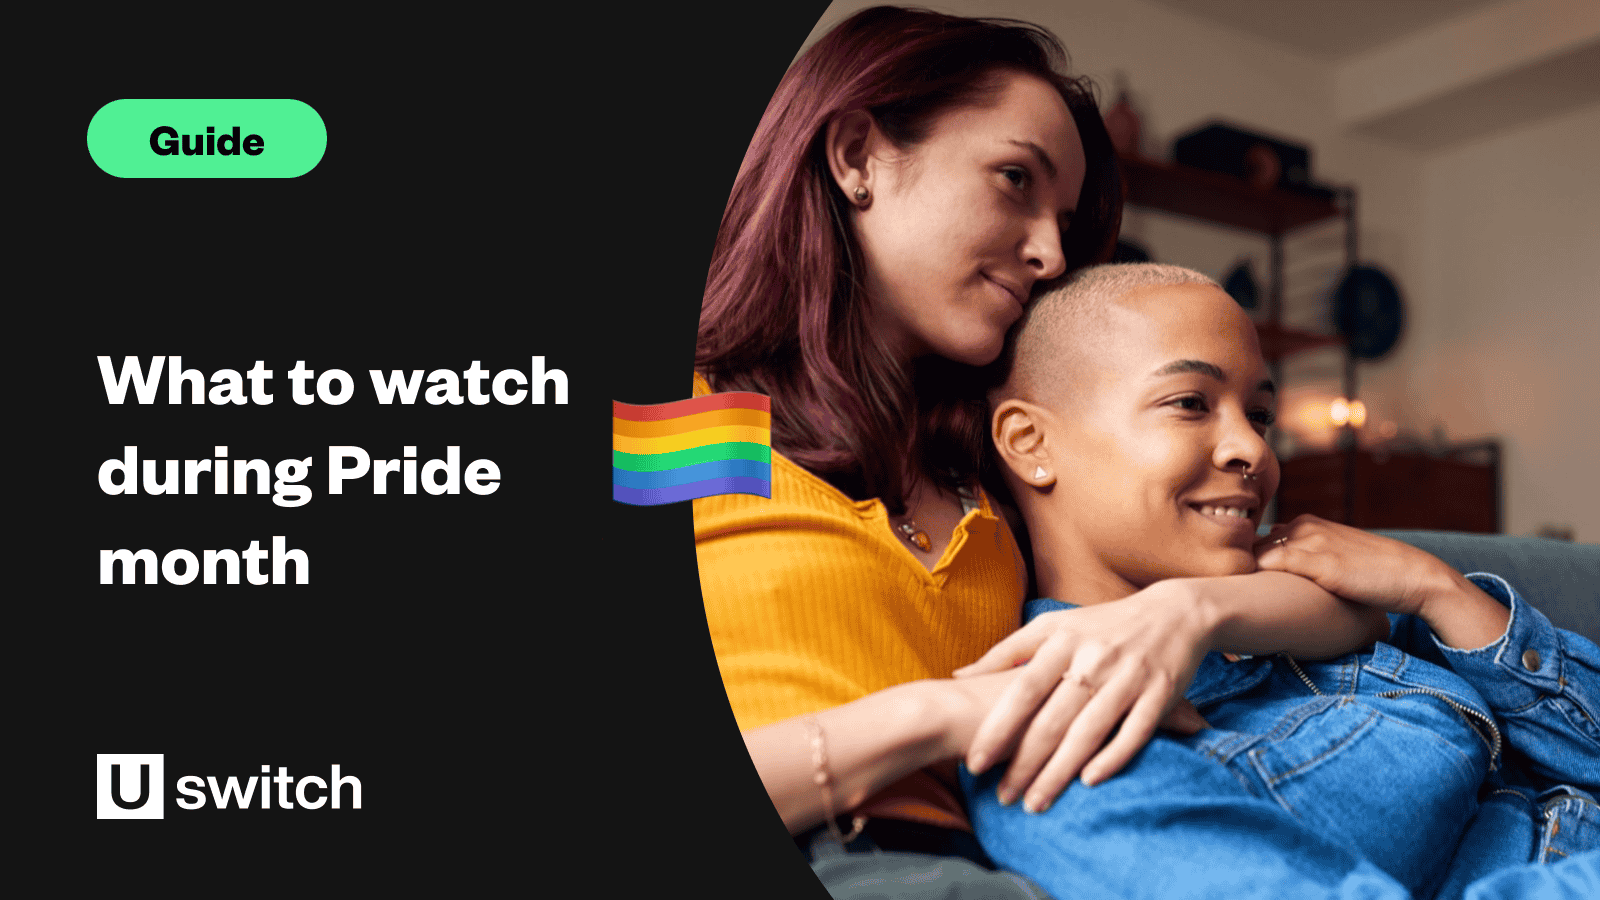 What to watch during Pride month